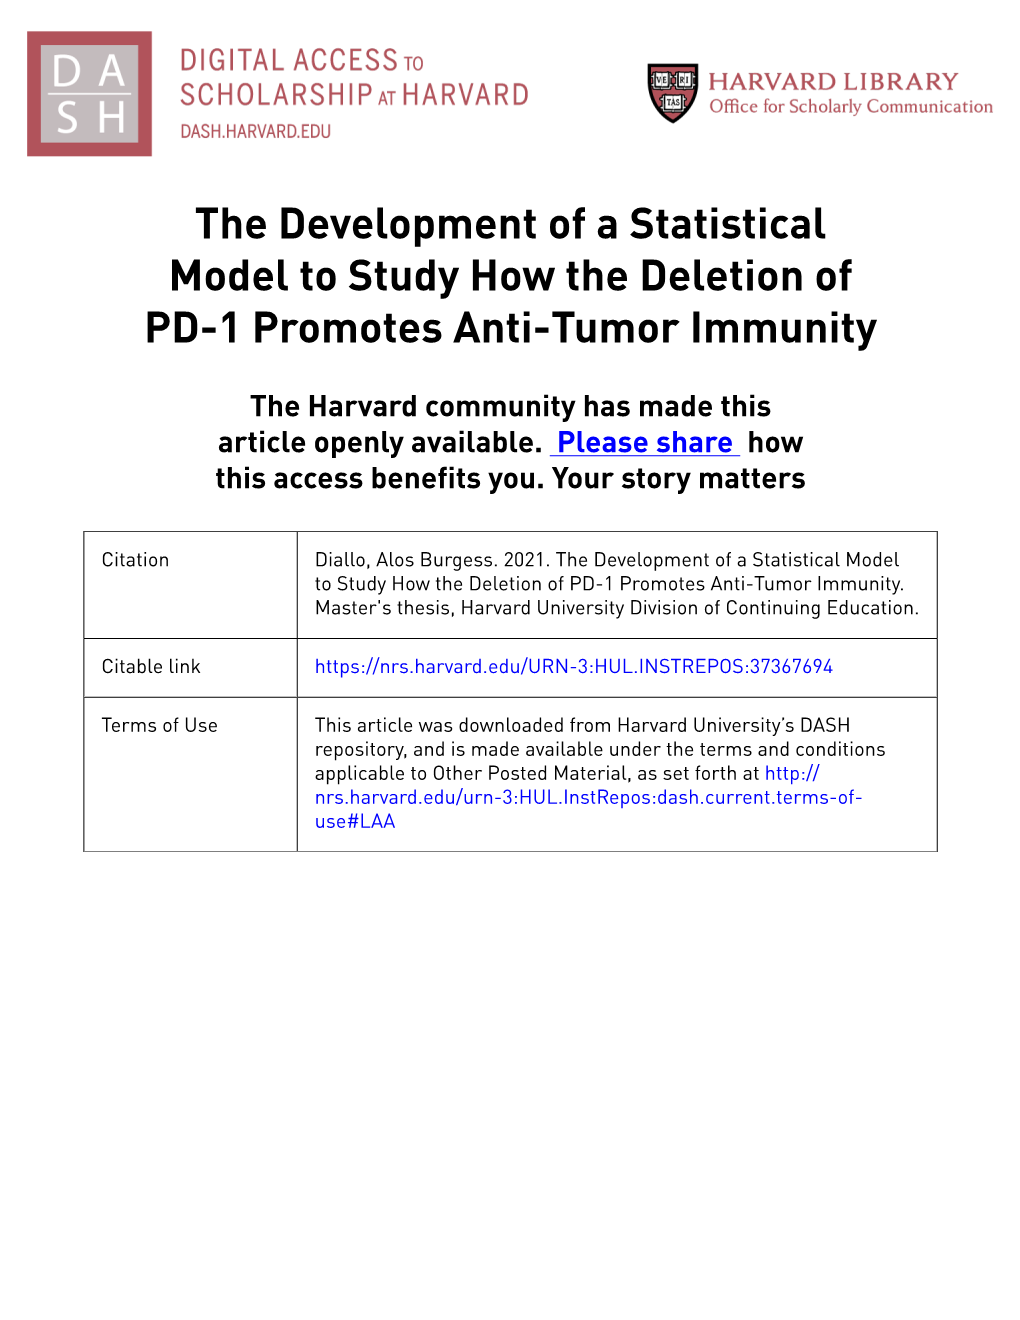 The Development of a Statistical Model to Study How the Deletion of PD-1 Promotes Anti-Tumor Immunity